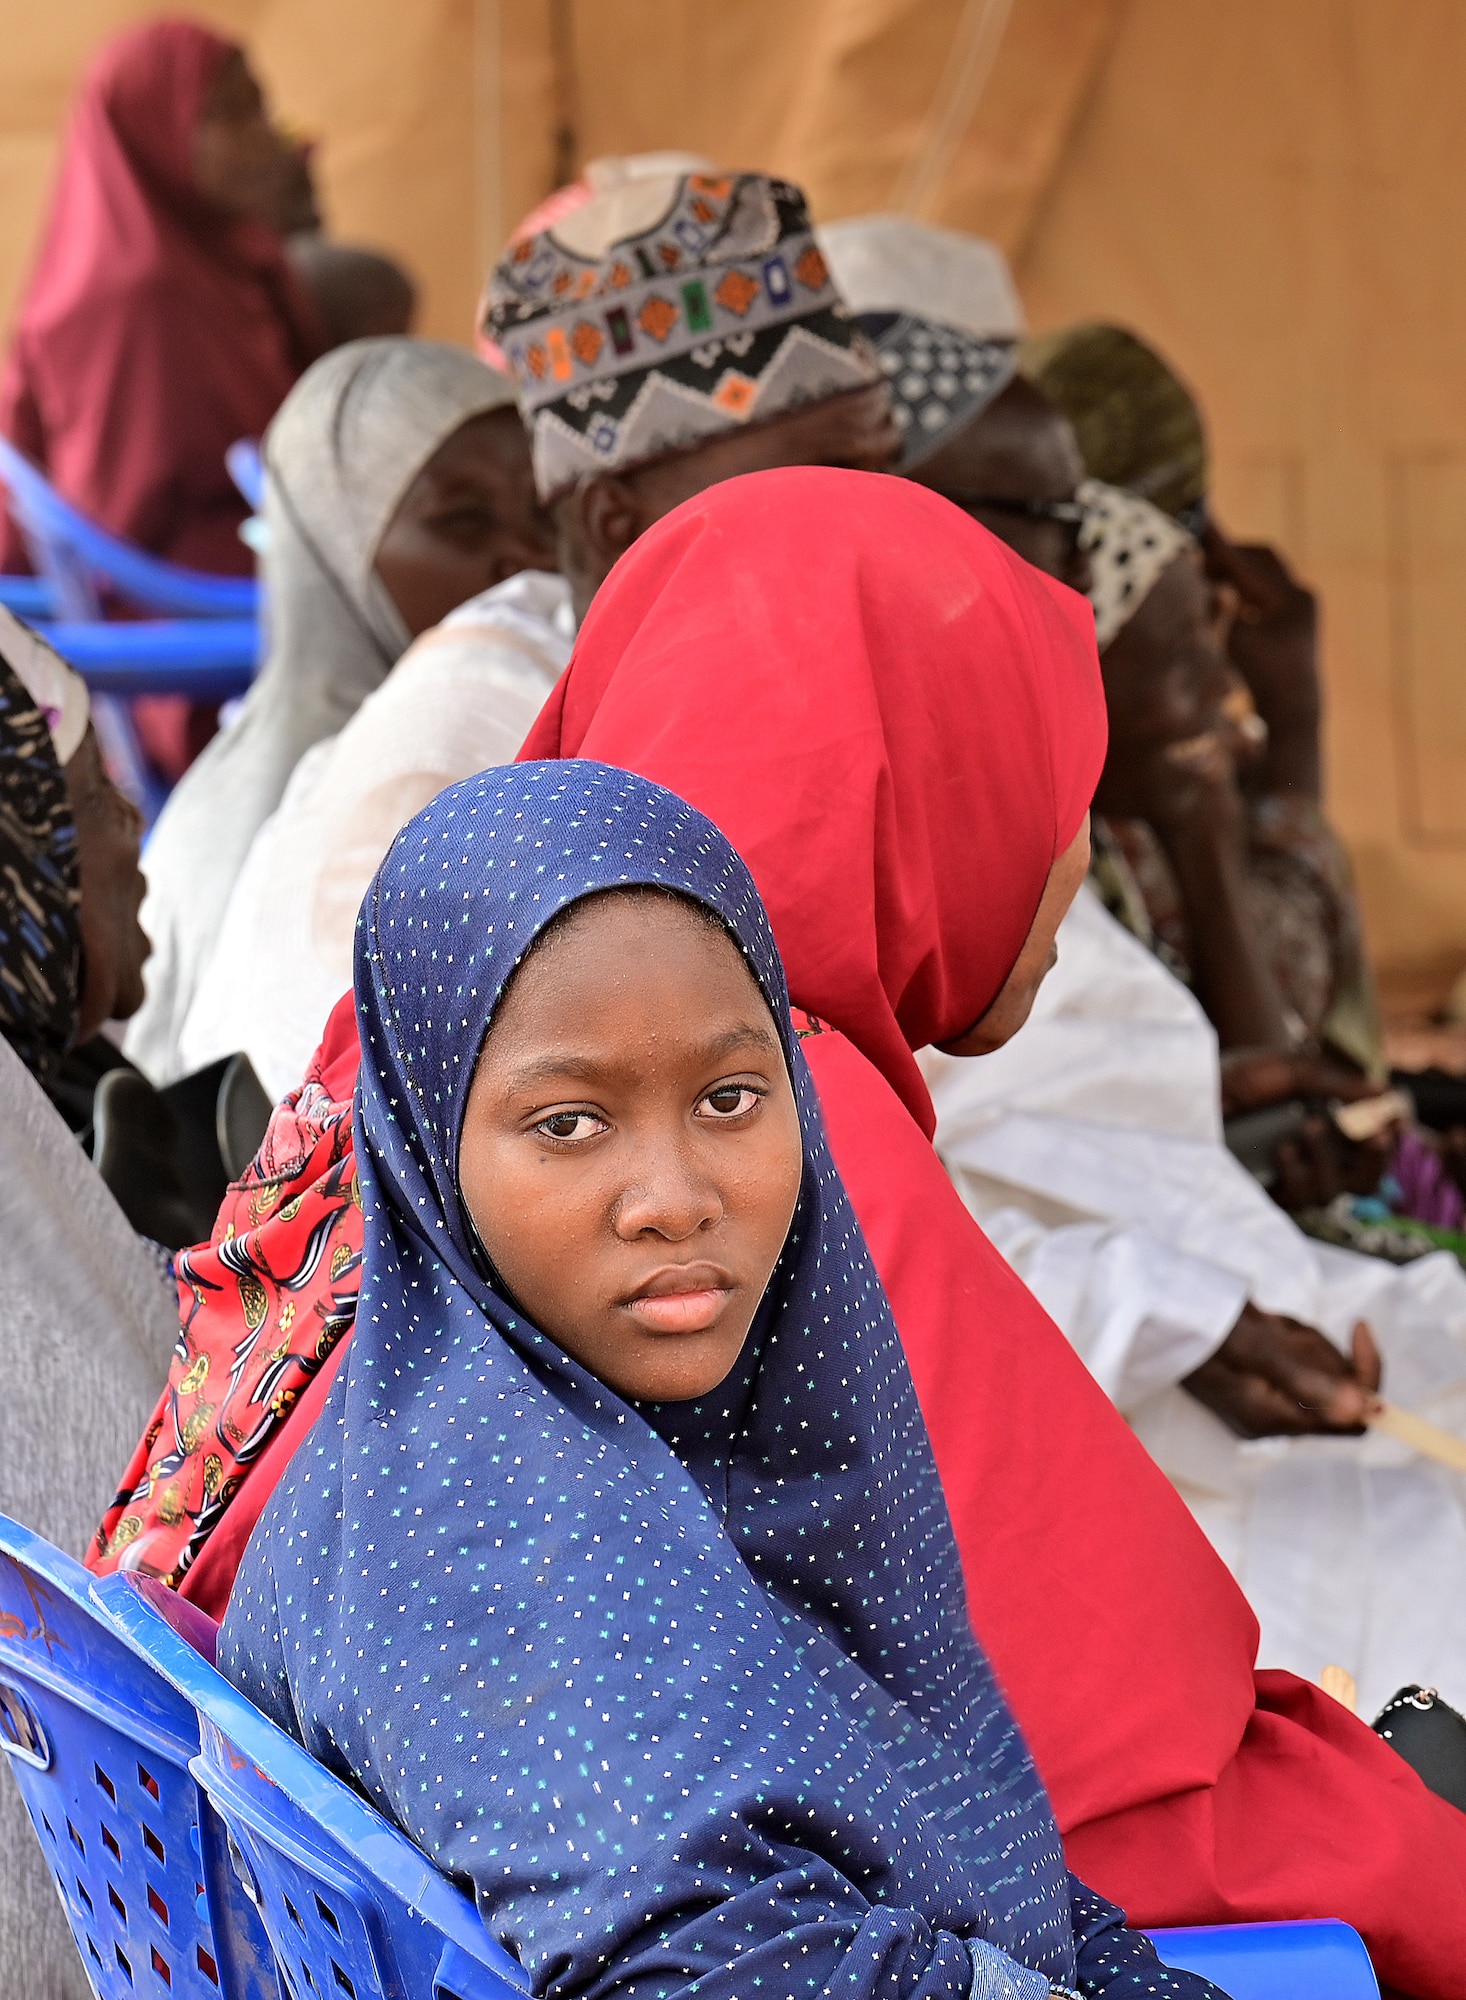 A young Nigerien girl waits to be seen during a medical civic action program (MEDCAP) at Ouallam, Niger, March 16, 2022. The Niger-U.S. joint MEDCAP provided medical treatment to approximately 550 patients, ranging from small children to the elderly. (U.S. Air Force photo by Tech. Sgt. Stephanie Longoria)